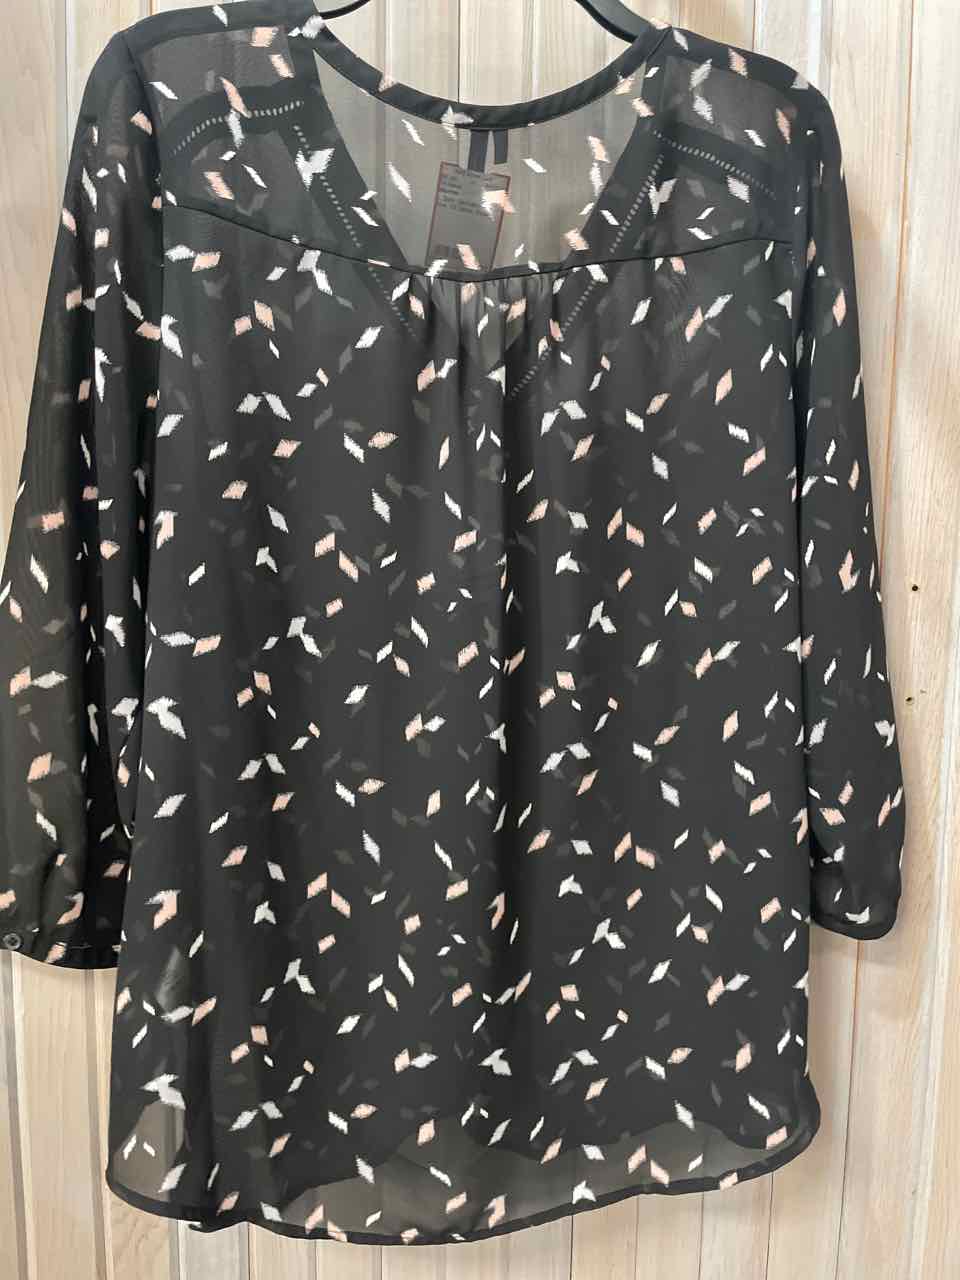 L - Maurices 3/4 Sleeve